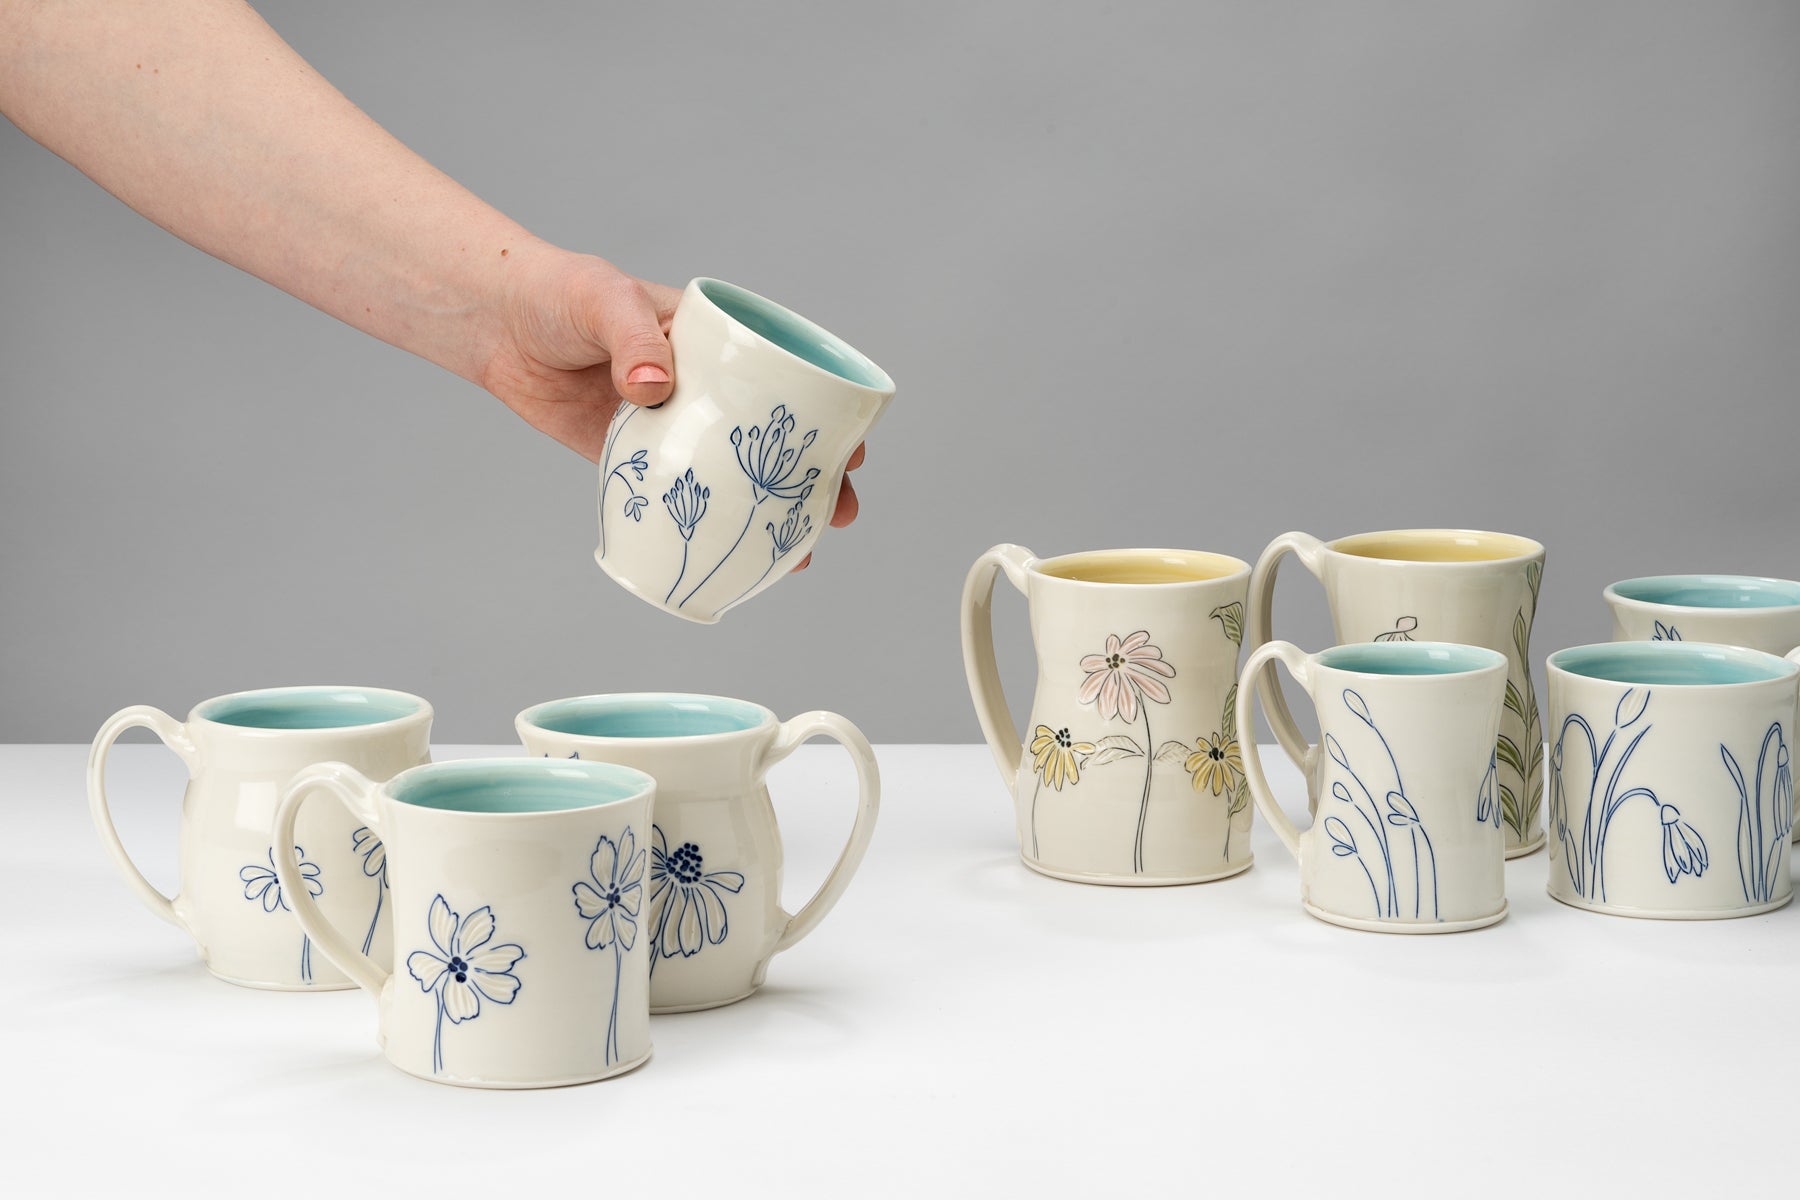 White and blue handmade porcelain cups and mugs by ceramic artist Julie Wiggins sit on a white table against a grey background. Image by Loam